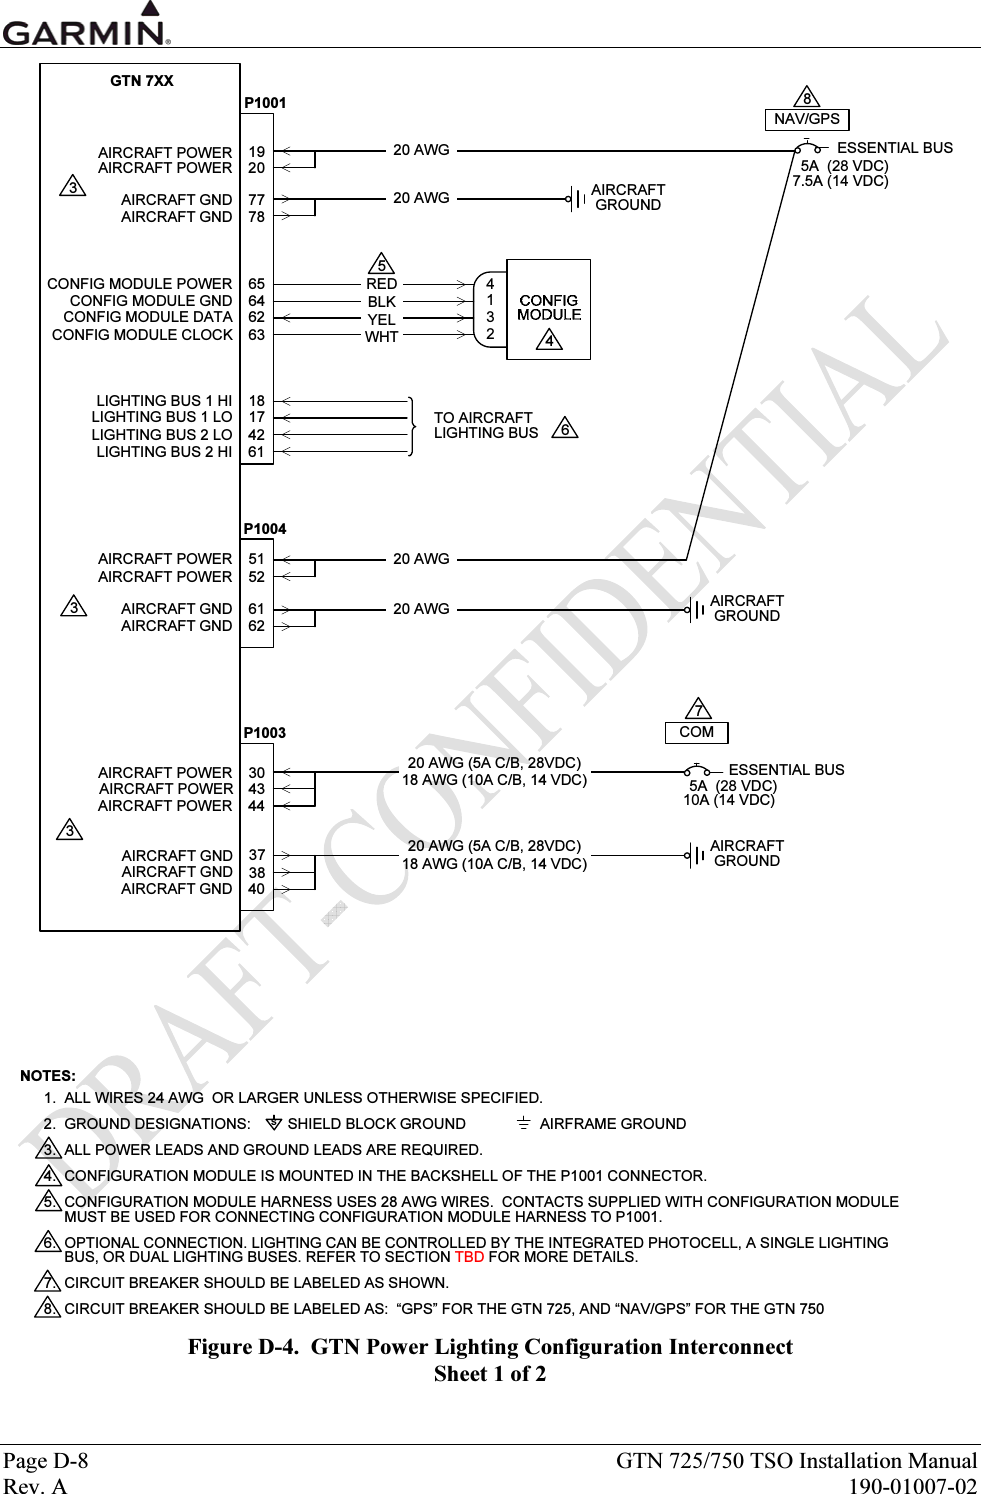  Page D-8  GTN 725/750 TSO Installation Manual Rev. A  190-01007-02 P1001GTN 7XXNOTES:1.  ALL WIRES 24 AWG  OR LARGER UNLESS OTHERWISE SPECIFIED.  2.  GROUND DESIGNATIONS:         SHIELD BLOCK GROUND                  AIRFRAME GROUND3.  ALL POWER LEADS AND GROUND LEADS ARE REQUIRED.4.  CONFIGURATION MODULE IS MOUNTED IN THE BACKSHELL OF THE P1001 CONNECTOR. 5.  CONFIGURATION MODULE HARNESS USES 28 AWG WIRES.  CONTACTS SUPPLIED WITH CONFIGURATION MODULE MUST BE USED FOR CONNECTING CONFIGURATION MODULE HARNESS TO P1001.6.  OPTIONAL CONNECTION. LIGHTING CAN BE CONTROLLED BY THE INTEGRATED PHOTOCELL, A SINGLE LIGHTING BUS, OR DUAL LIGHTING BUSES. REFER TO SECTION TBD FOR MORE DETAILS.7.  CIRCUIT BREAKER SHOULD BE LABELED AS SHOWN.8.  CIRCUIT BREAKER SHOULD BE LABELED AS:  “GPS” FOR THE GTN 725, AND “NAV/GPS” FOR THE GTN 750sCONFIG MODULE POWERCONFIG MODULE GNDCONFIG MODULE DATACONFIG MODULE CLOCK4132REDBLKYELWHTLIGHTING BUS 1 HILIGHTING BUS 1 LO TO AIRCRAFT LIGHTING BUS656462631817NAV/GPSAIRCRAFT POWERAIRCRAFT POWERAIRCRAFT GNDAIRCRAFT GND5A  (28 VDC)ESSENTIAL BUSAIRCRAFT GROUND7.5A (14 VDC)20 AWG20197877AIRCRAFT POWERAIRCRAFT POWER 4330AIRCRAFT GNDAIRCRAFT GND 38374440P10035A  (28 VDC)ESSENTIAL BUS10A (14 VDC)AIRCRAFT POWERAIRCRAFT GNDCOMLIGHTING BUS 2 LOLIGHTING BUS 2 HI 6142P1004AIRCRAFT POWERAIRCRAFT POWERAIRCRAFT GNDAIRCRAFT GND5251626120 AWG20 AWG AIRCRAFT GROUND20 AWG (5A C/B, 28VDC)18 AWG (10A C/B, 14 VDC)AIRCRAFT GROUND20 AWG (5A C/B, 28VDC)18 AWG (10A C/B, 14 VDC)20 AWG33346857 Figure D-4.  GTN Power Lighting Configuration Interconnect Sheet 1 of 2 